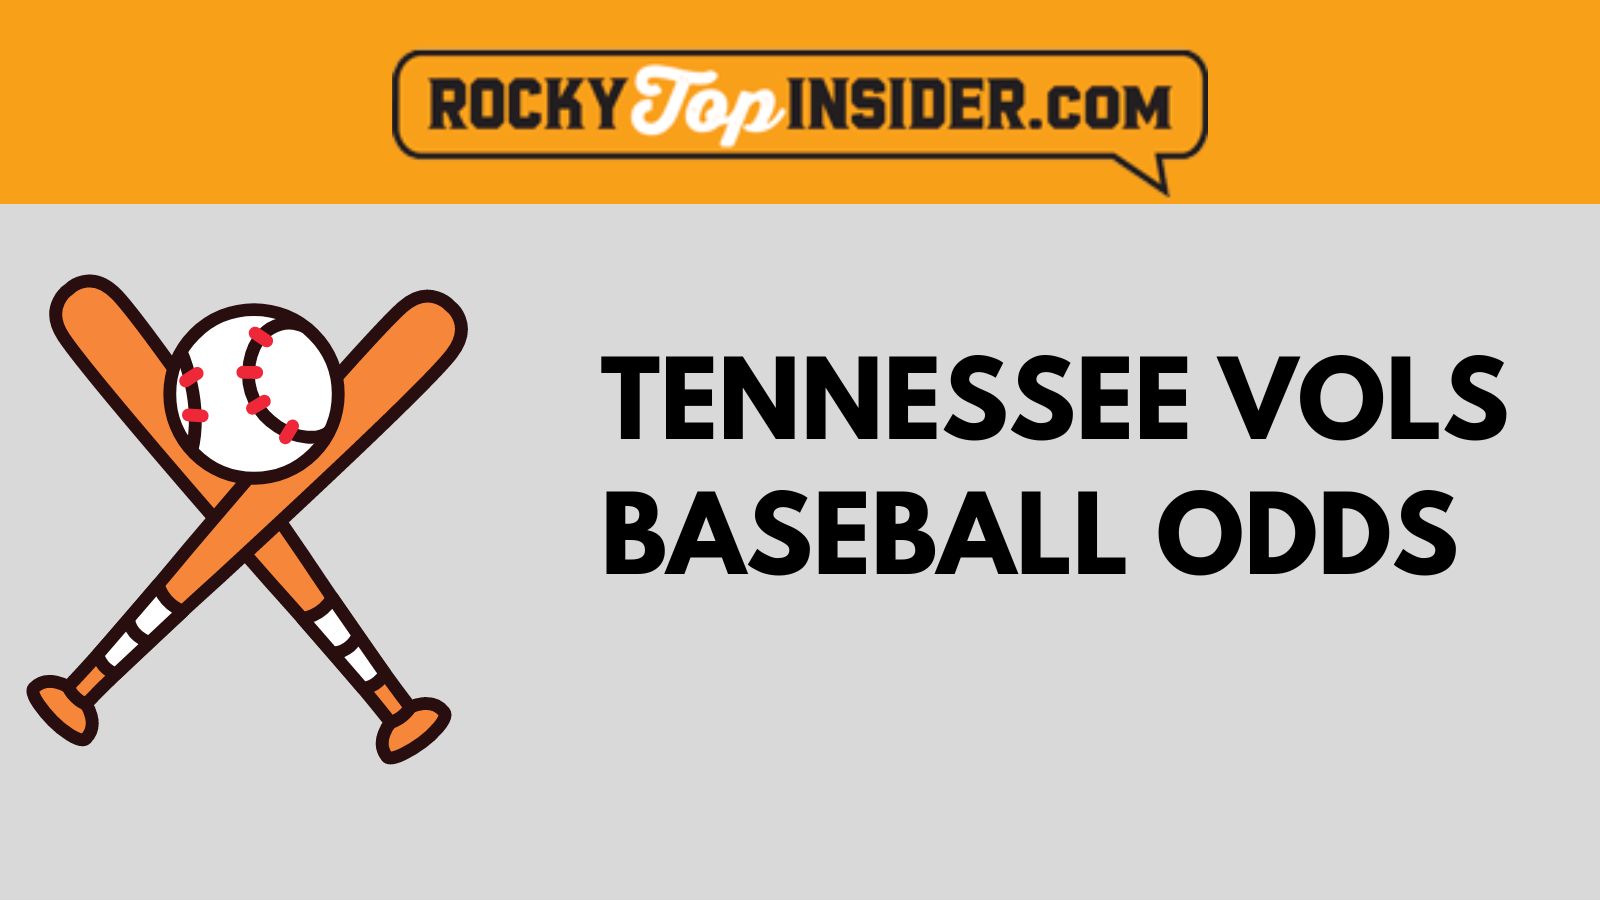 Tennessee vs. Florida Baseball Odds Vols Favored in Game 2 vs. No. 2